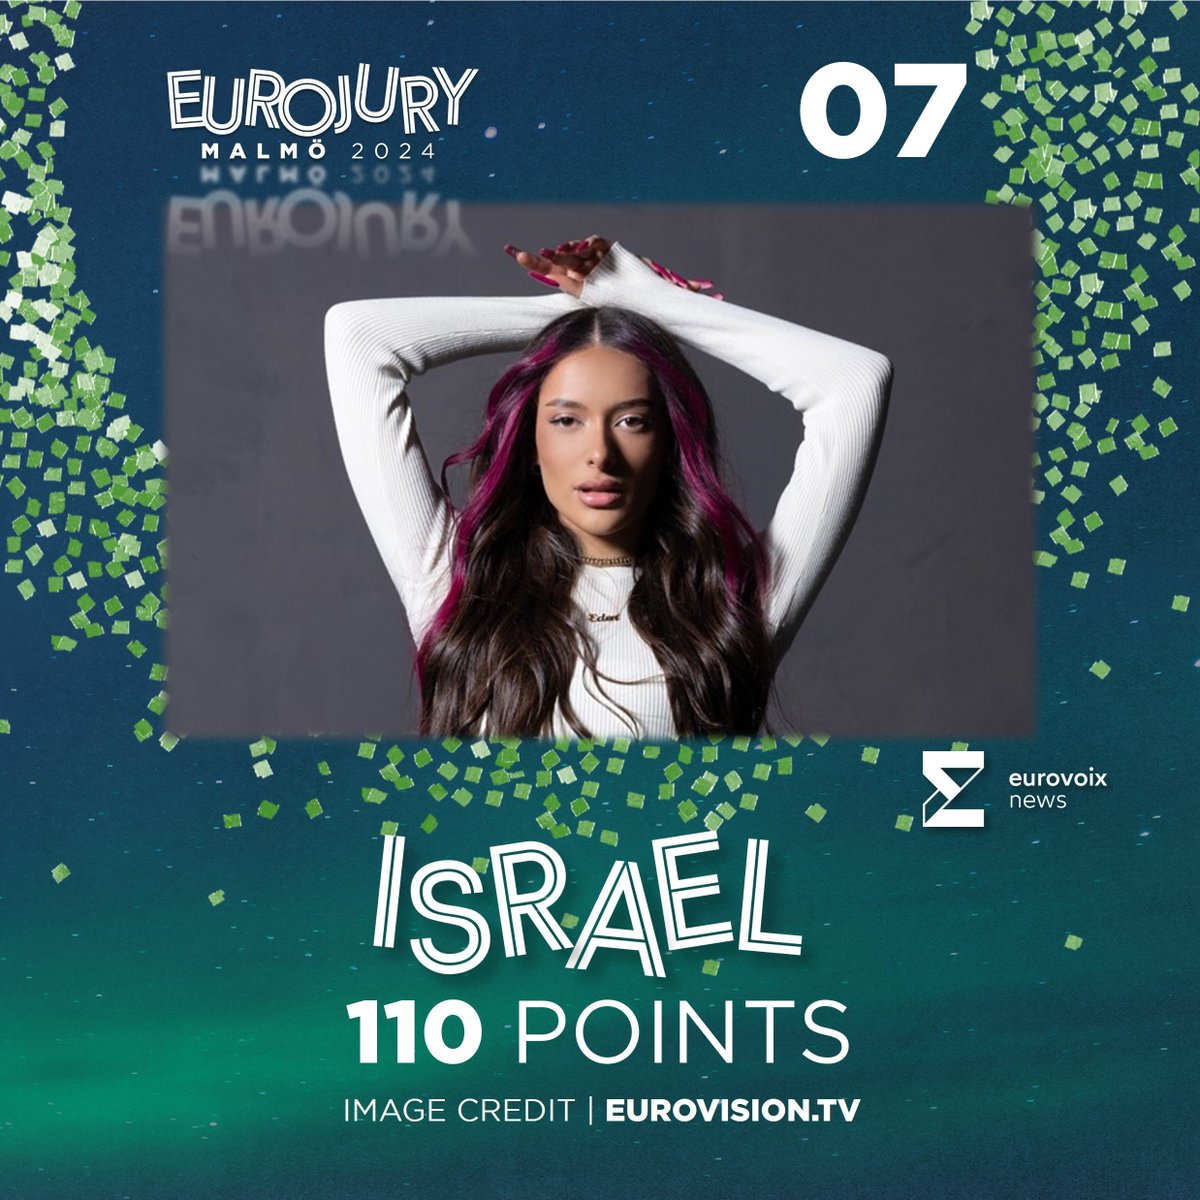 🇮🇱 One above Greece and finishing 7th with the #Eurojury 2024 juries is Israel. Eden Golan scored 110 points across 13 juries.